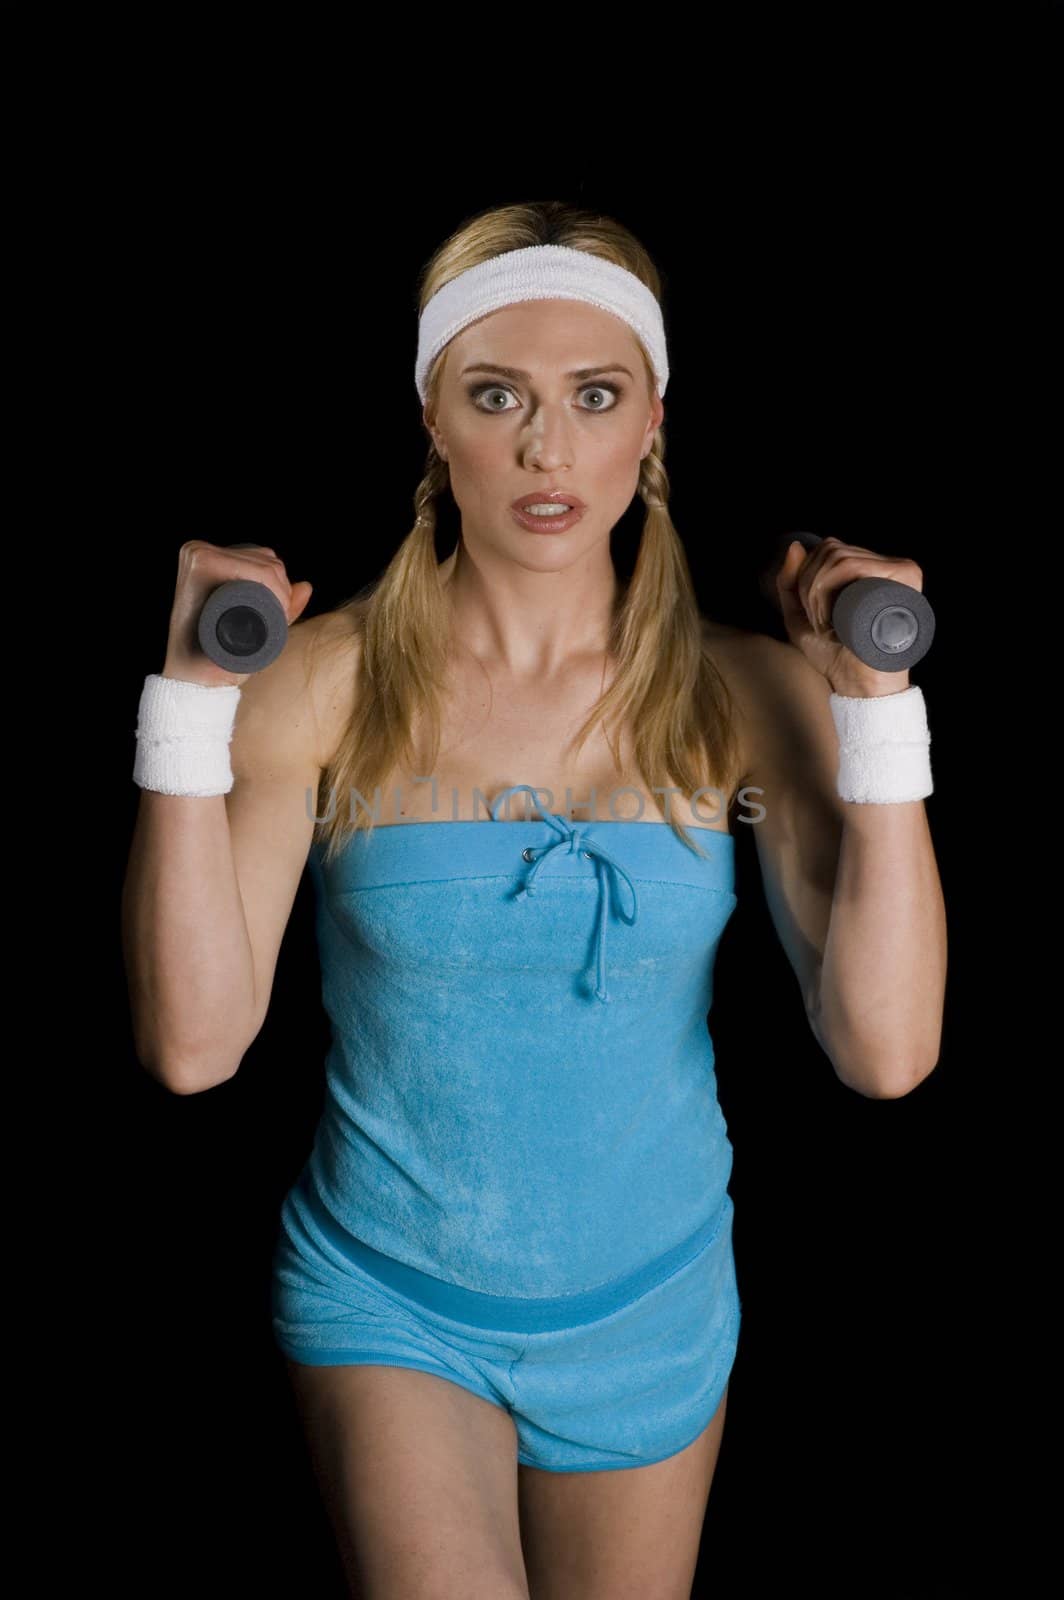 Attractive woman exercising with weights, isolated on a black background